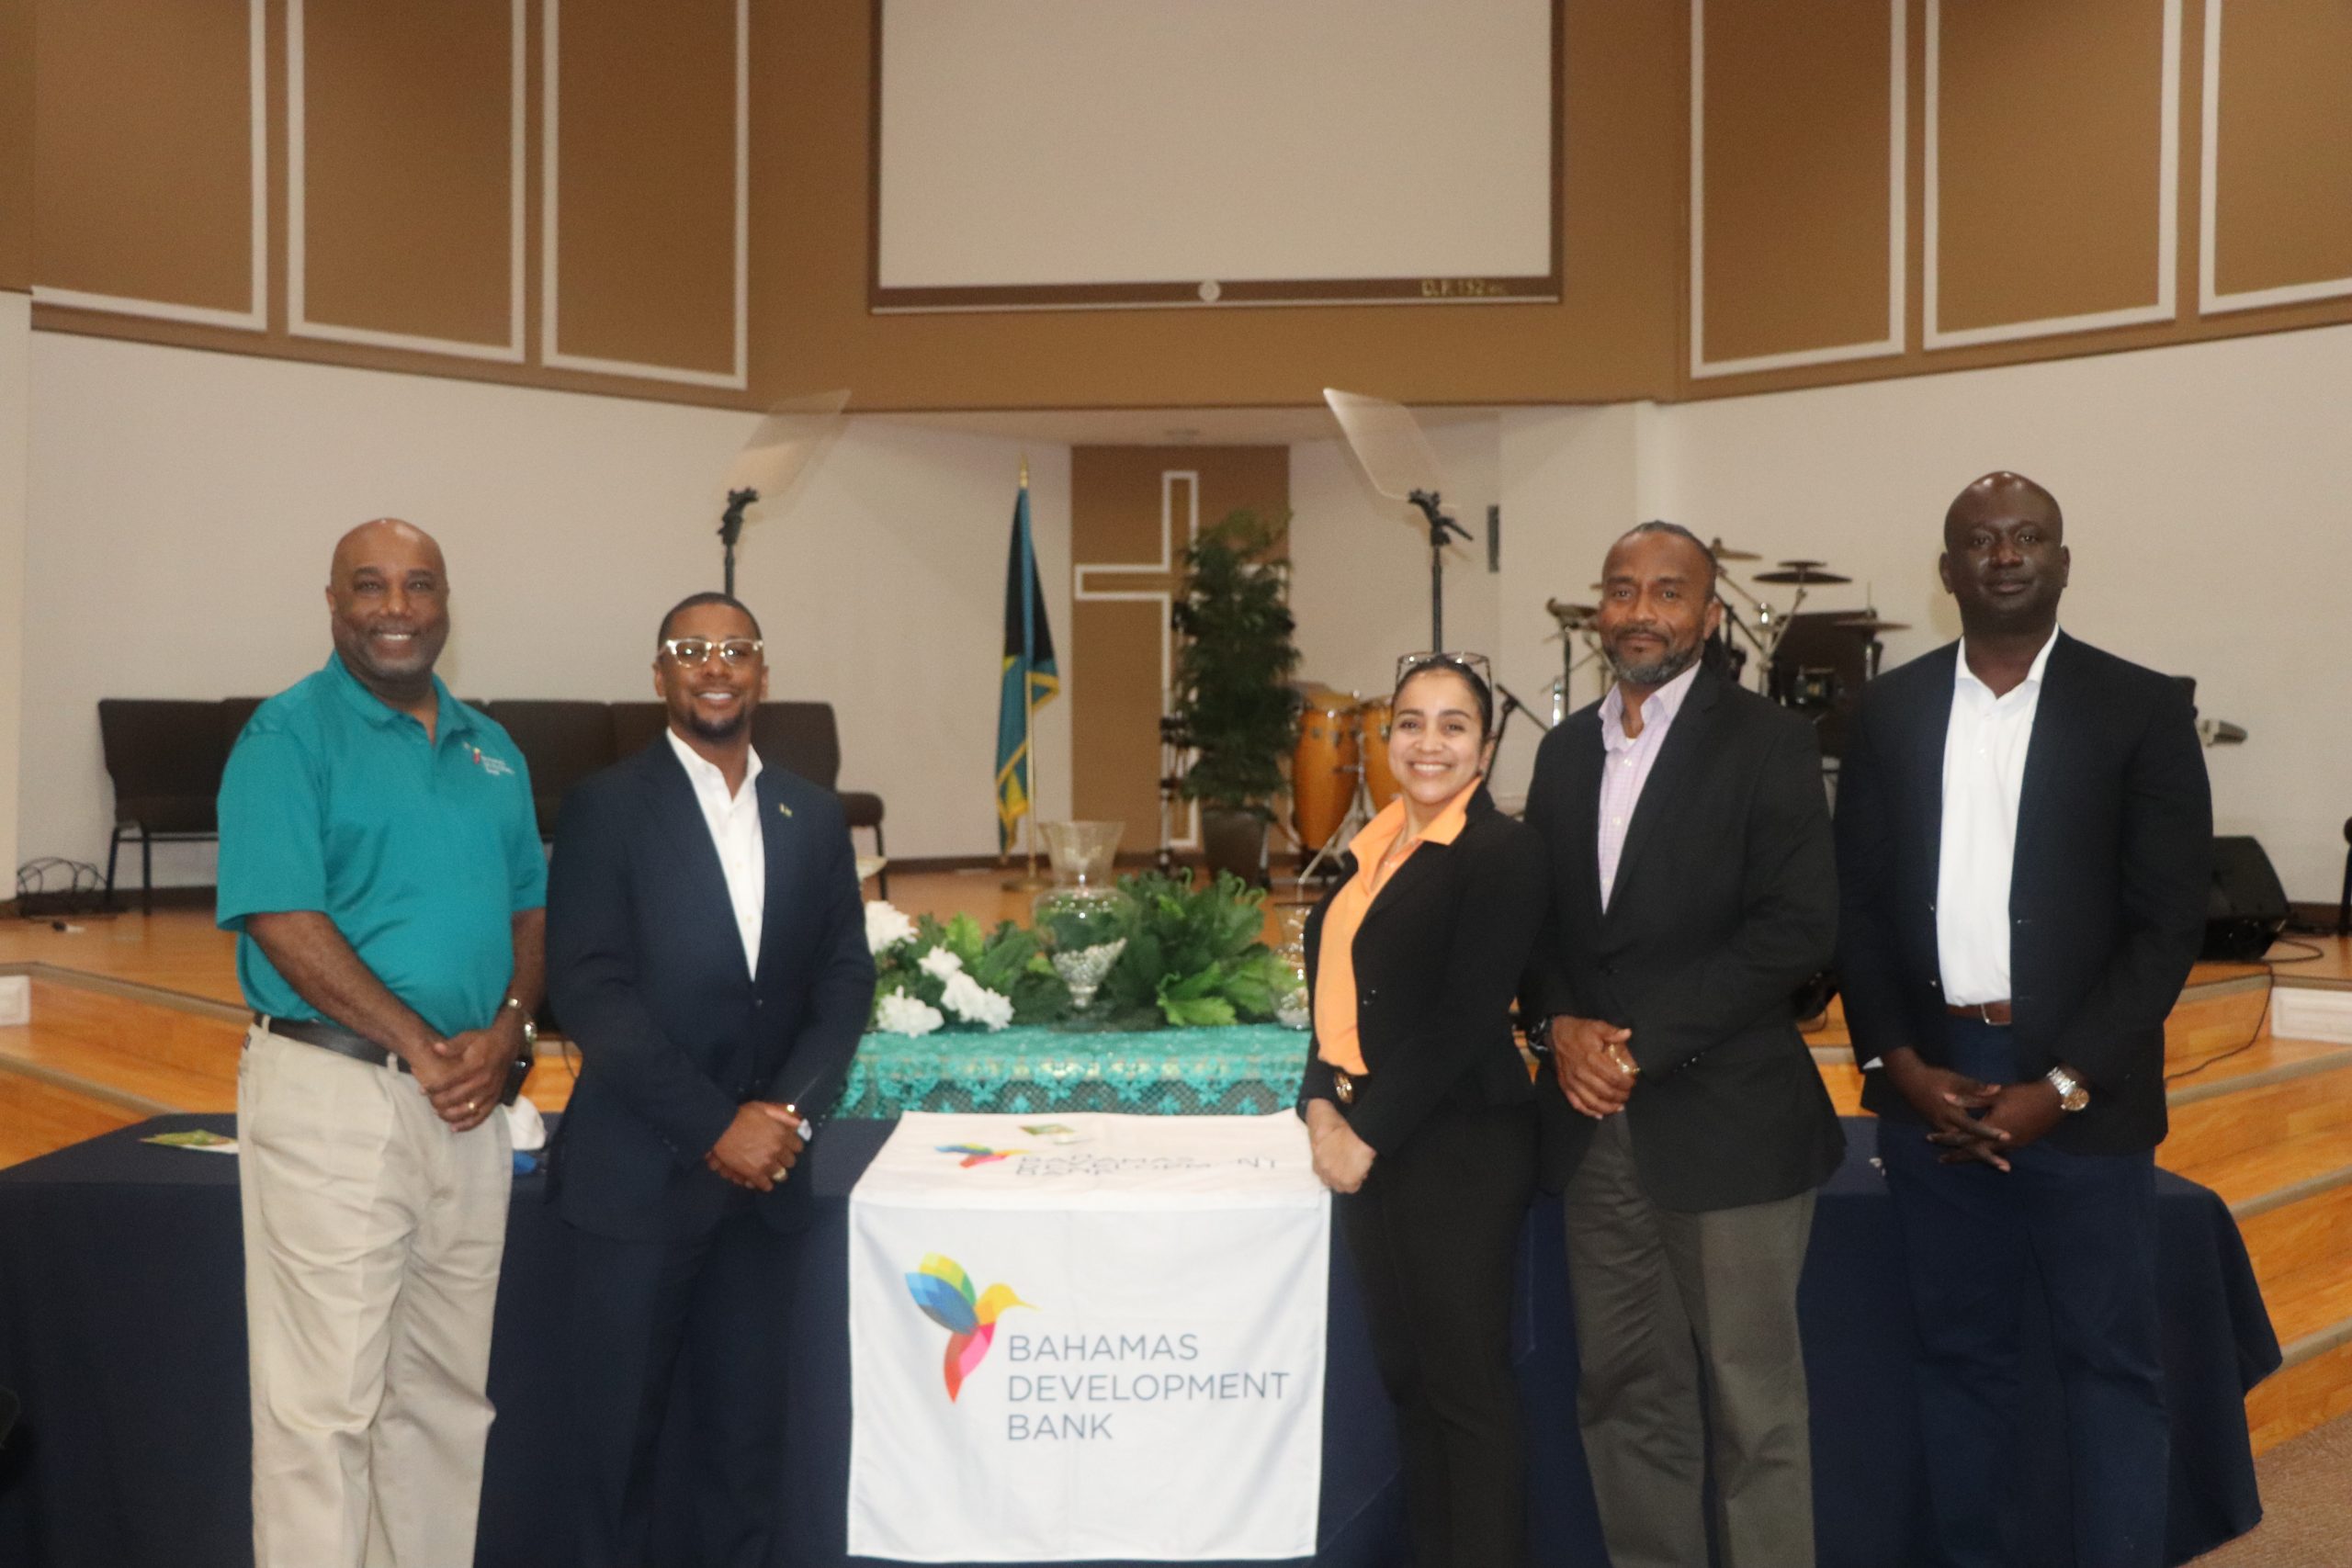 BDB Visits Abaco to Host Town Hall & Financing Clinics